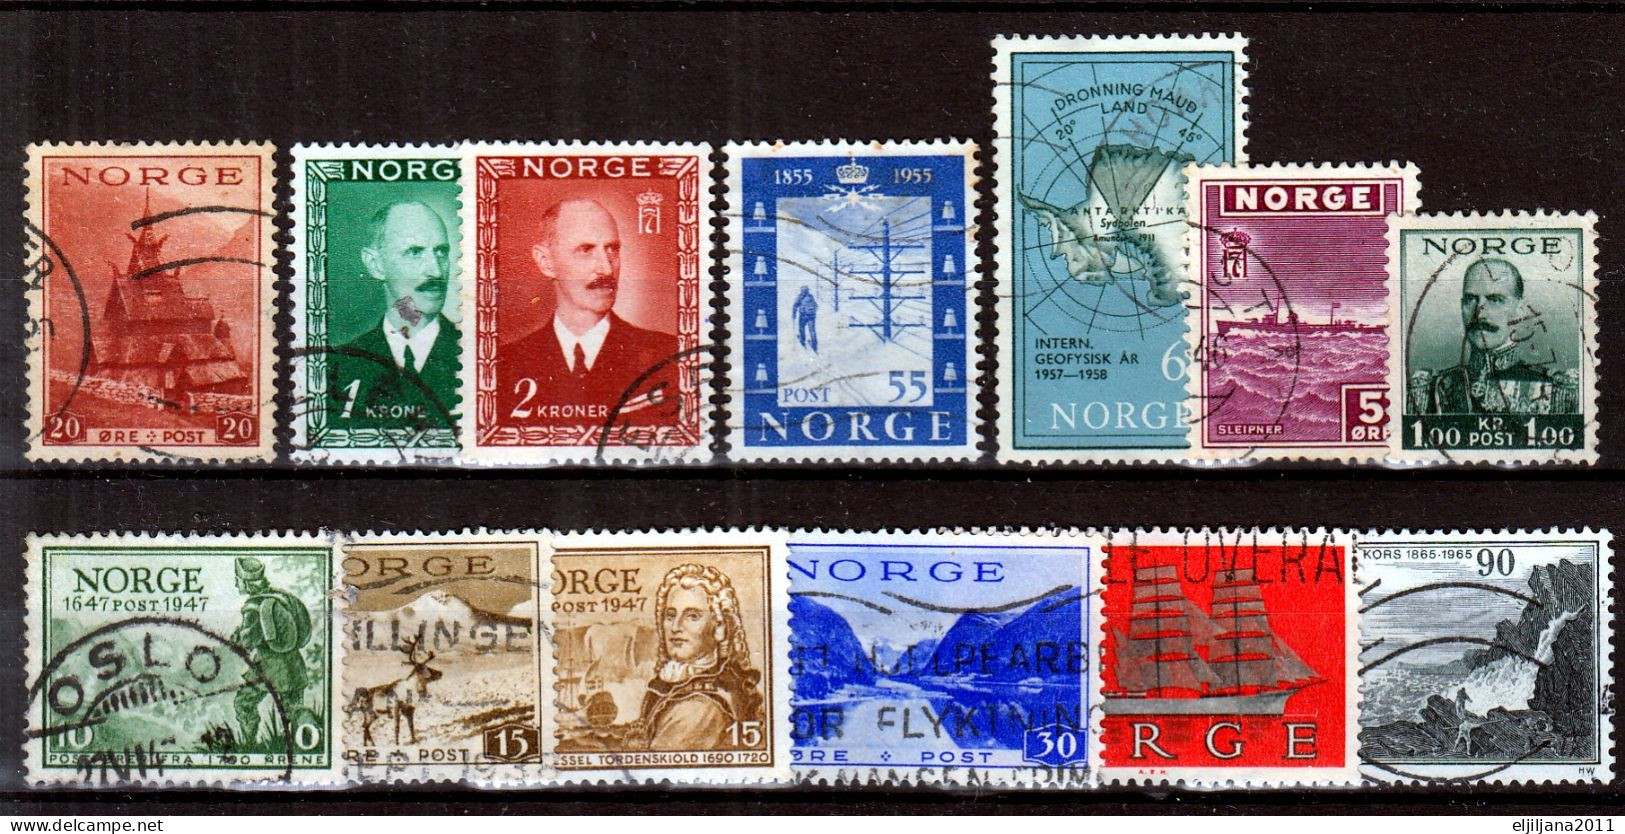 Action !! SALE !! 50 % OFF !! ⁕ Norway / NORGE 1938 - 1966 ⁕ Nice Collection / Lot ⁕ 32v Used - See Scan - Collezioni